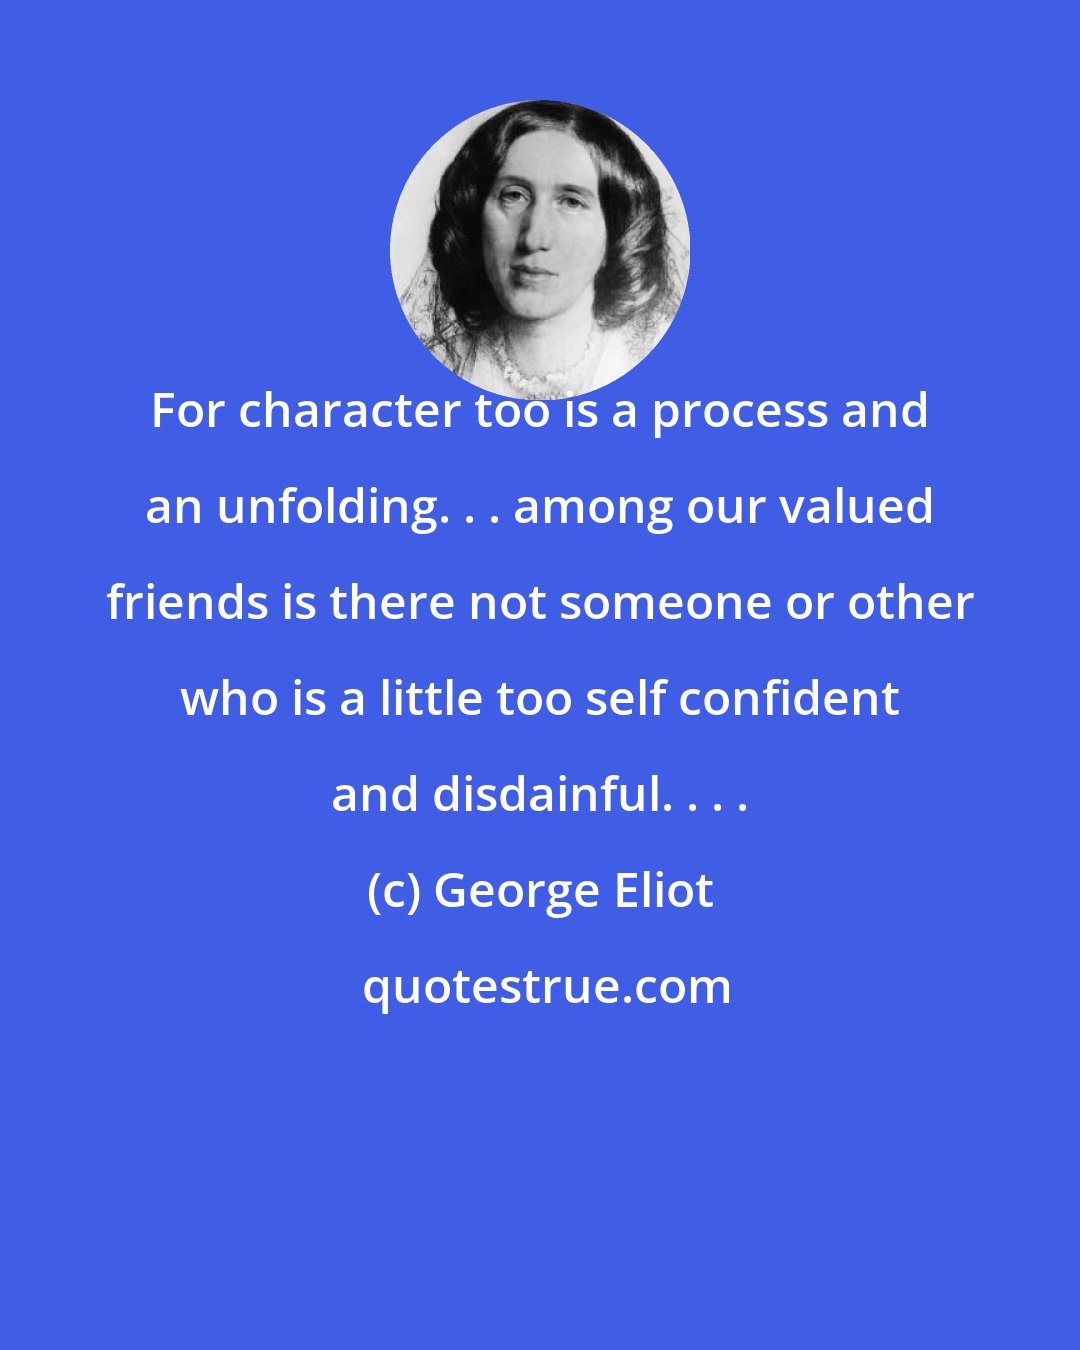 George Eliot: For character too is a process and an unfolding. . . among our valued friends is there not someone or other who is a little too self confident and disdainful. . . .